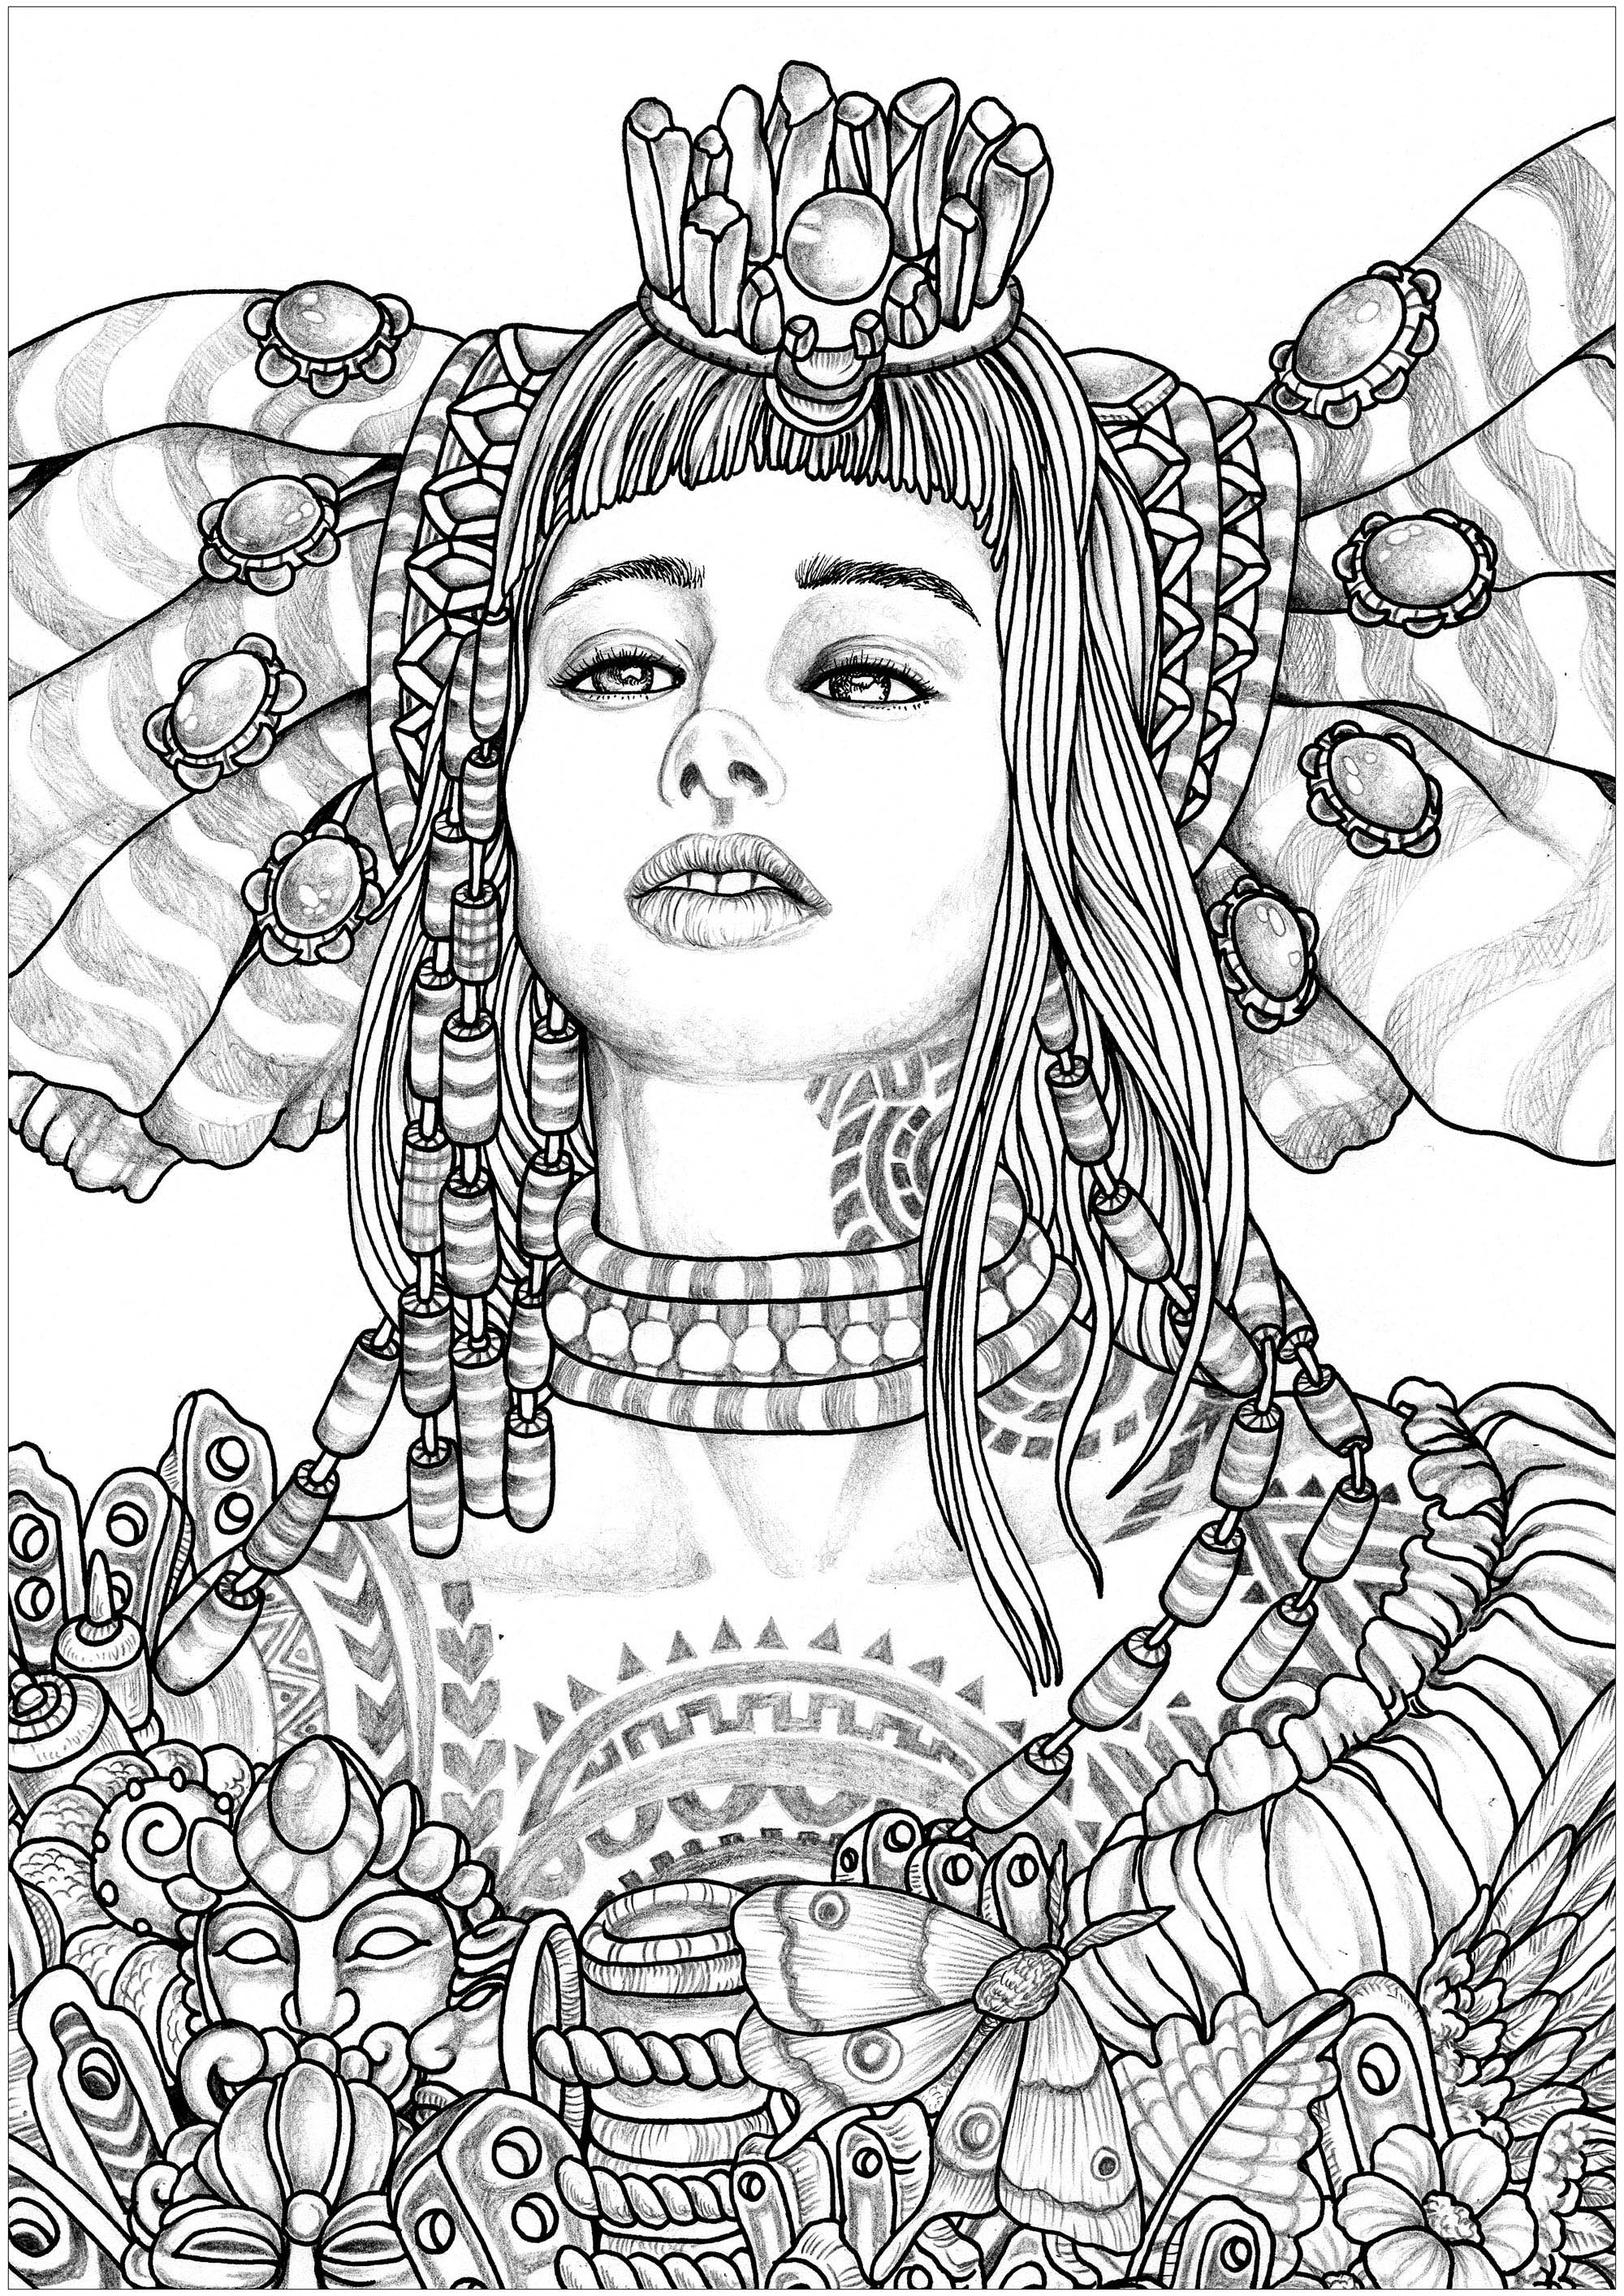 imahination-1-anti-stress-adult-coloring-pages